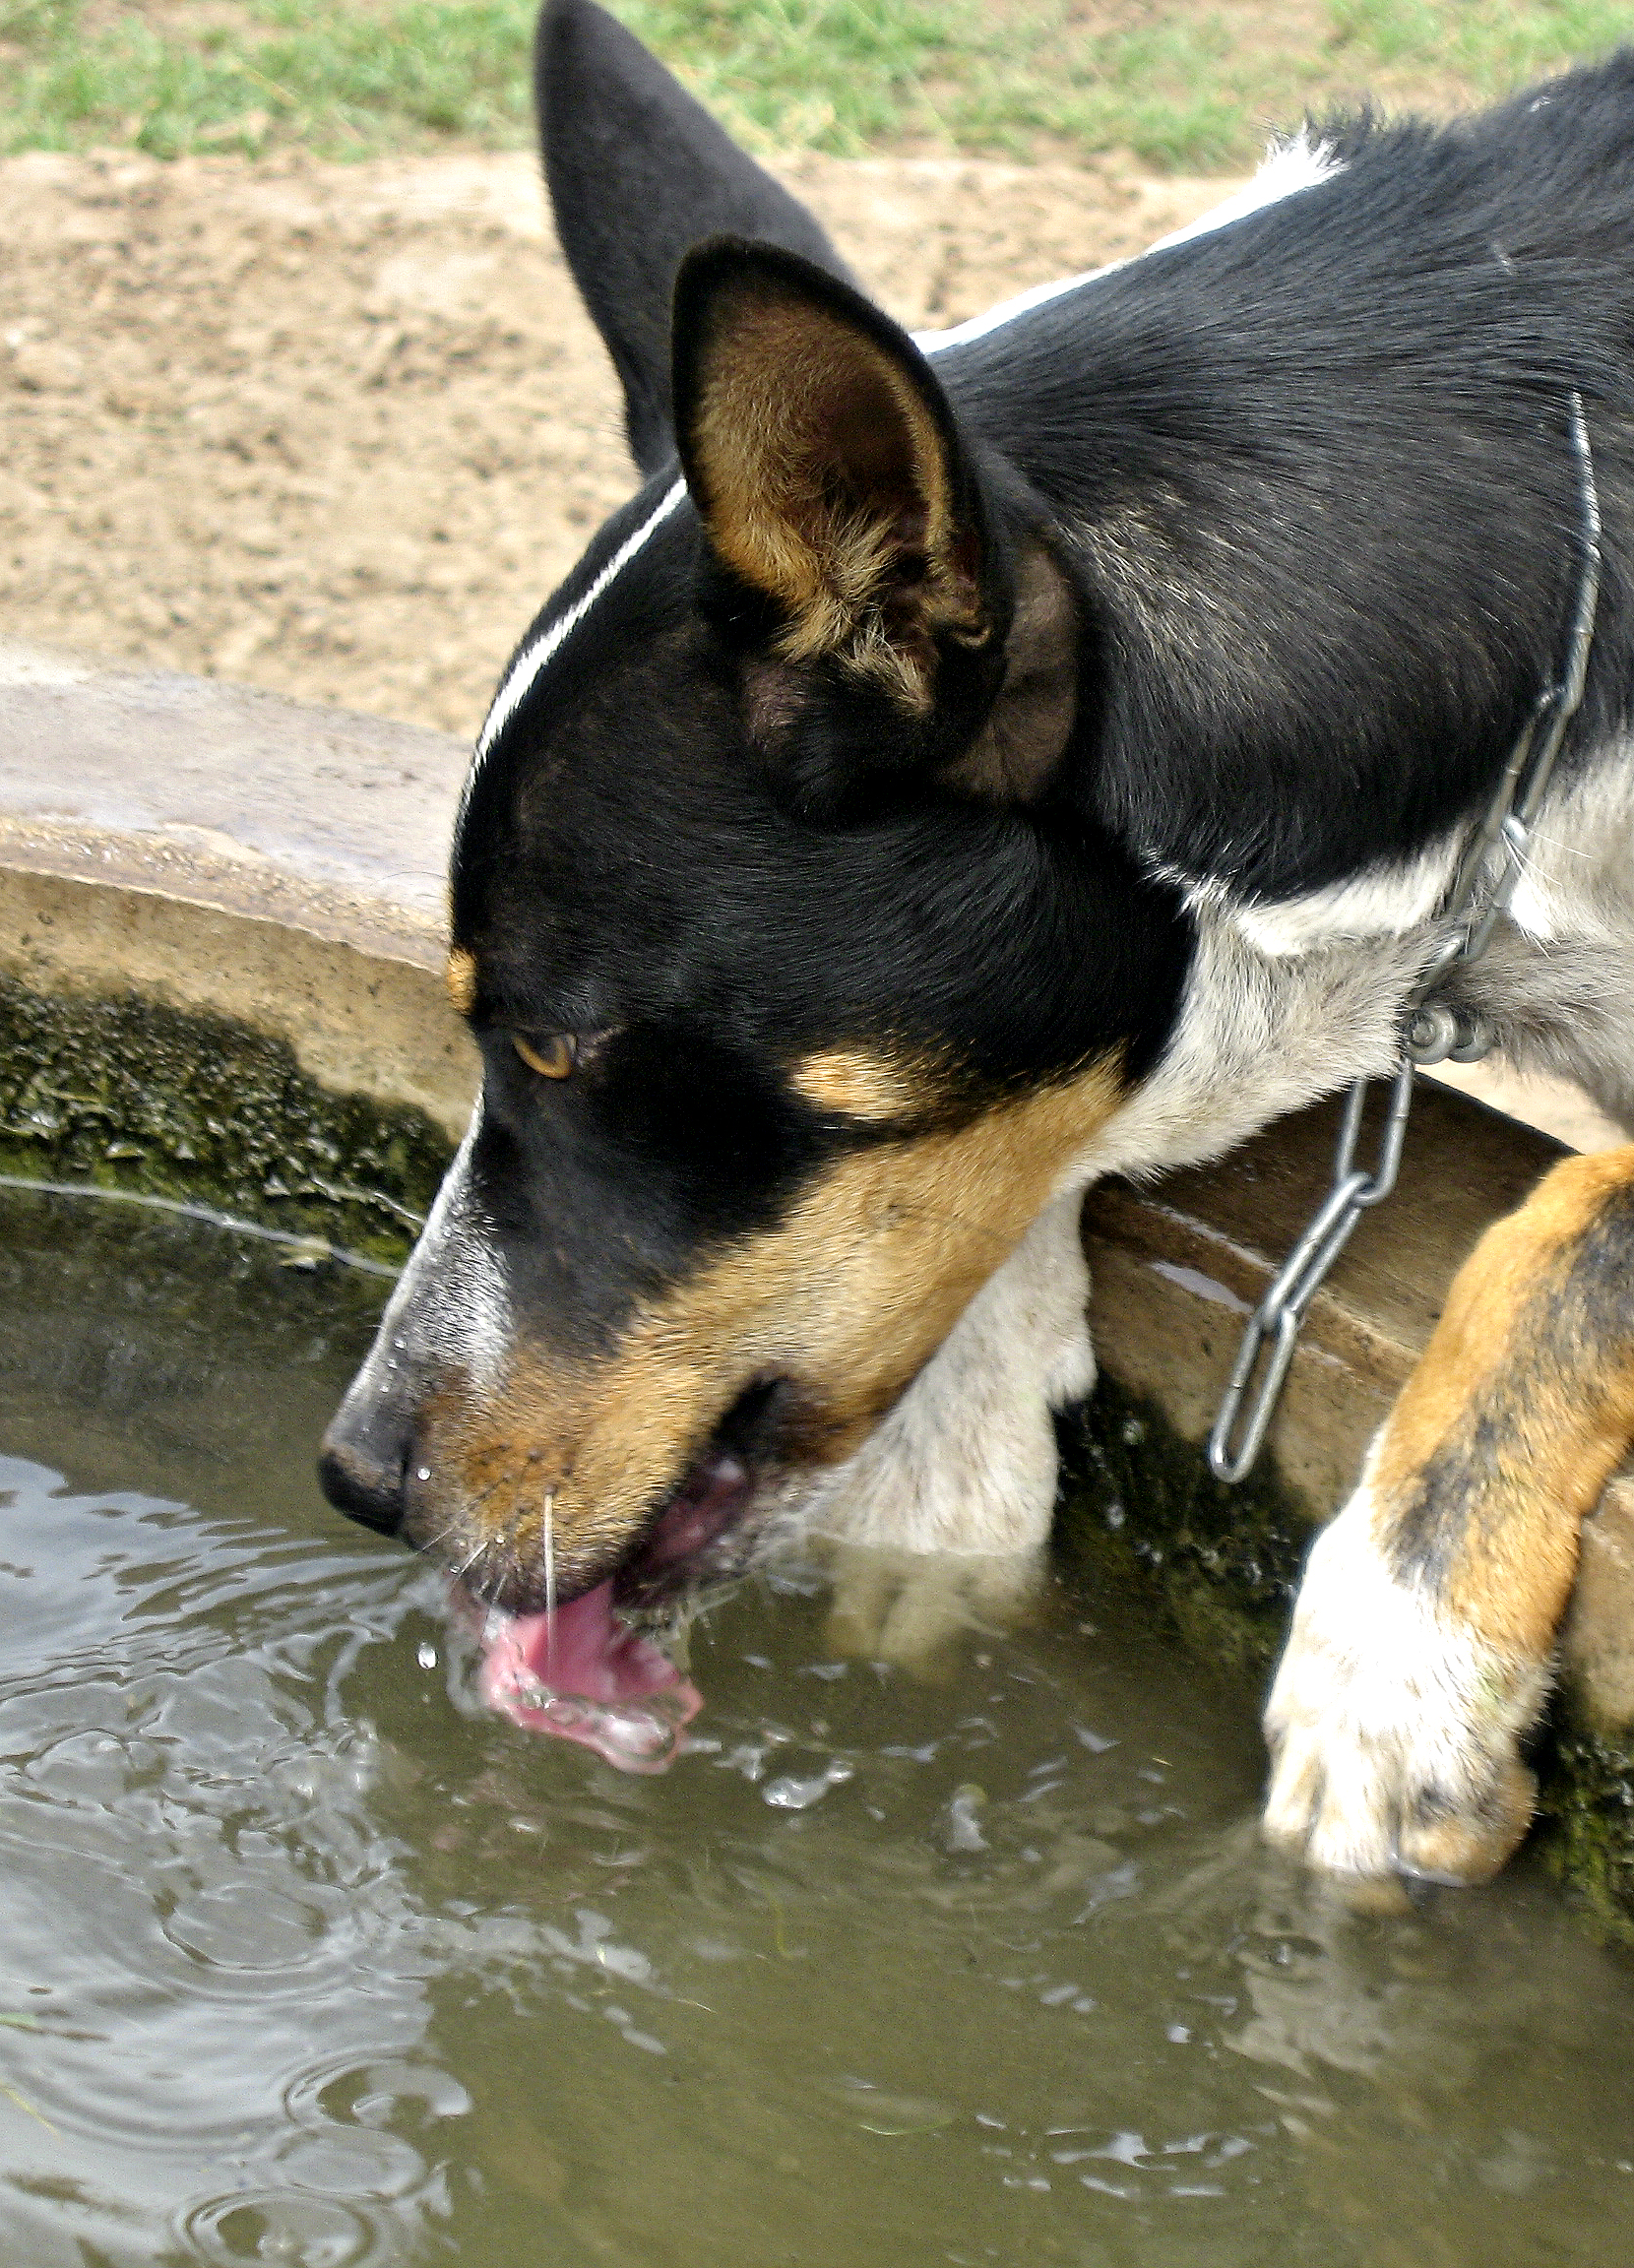 "Beau Working up a Thirst." Image by Zoe Burge. 2012 Winner - 'Images of Farm Life' - Primary Category